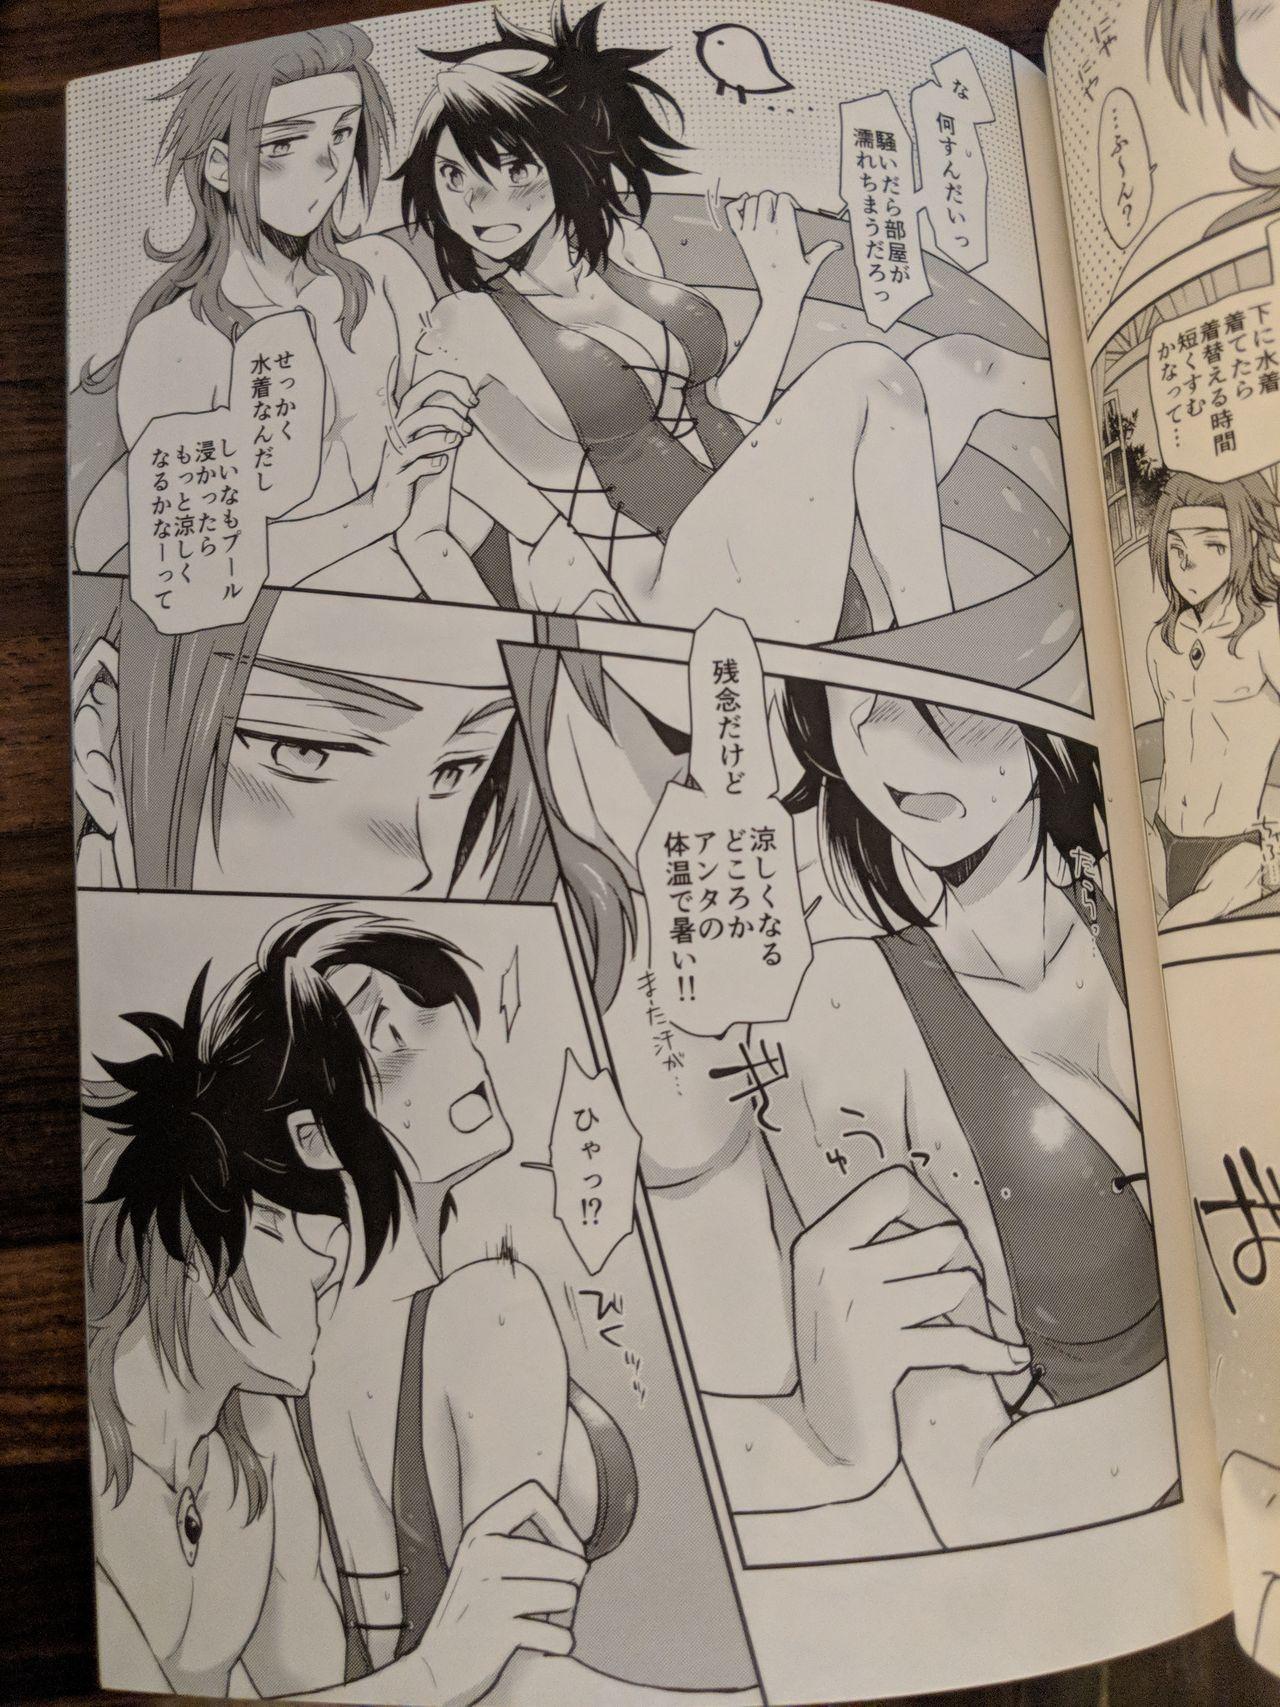 Amazing 彼女が水着にきがえたら - Tales of symphonia Nasty Porn - Page 8